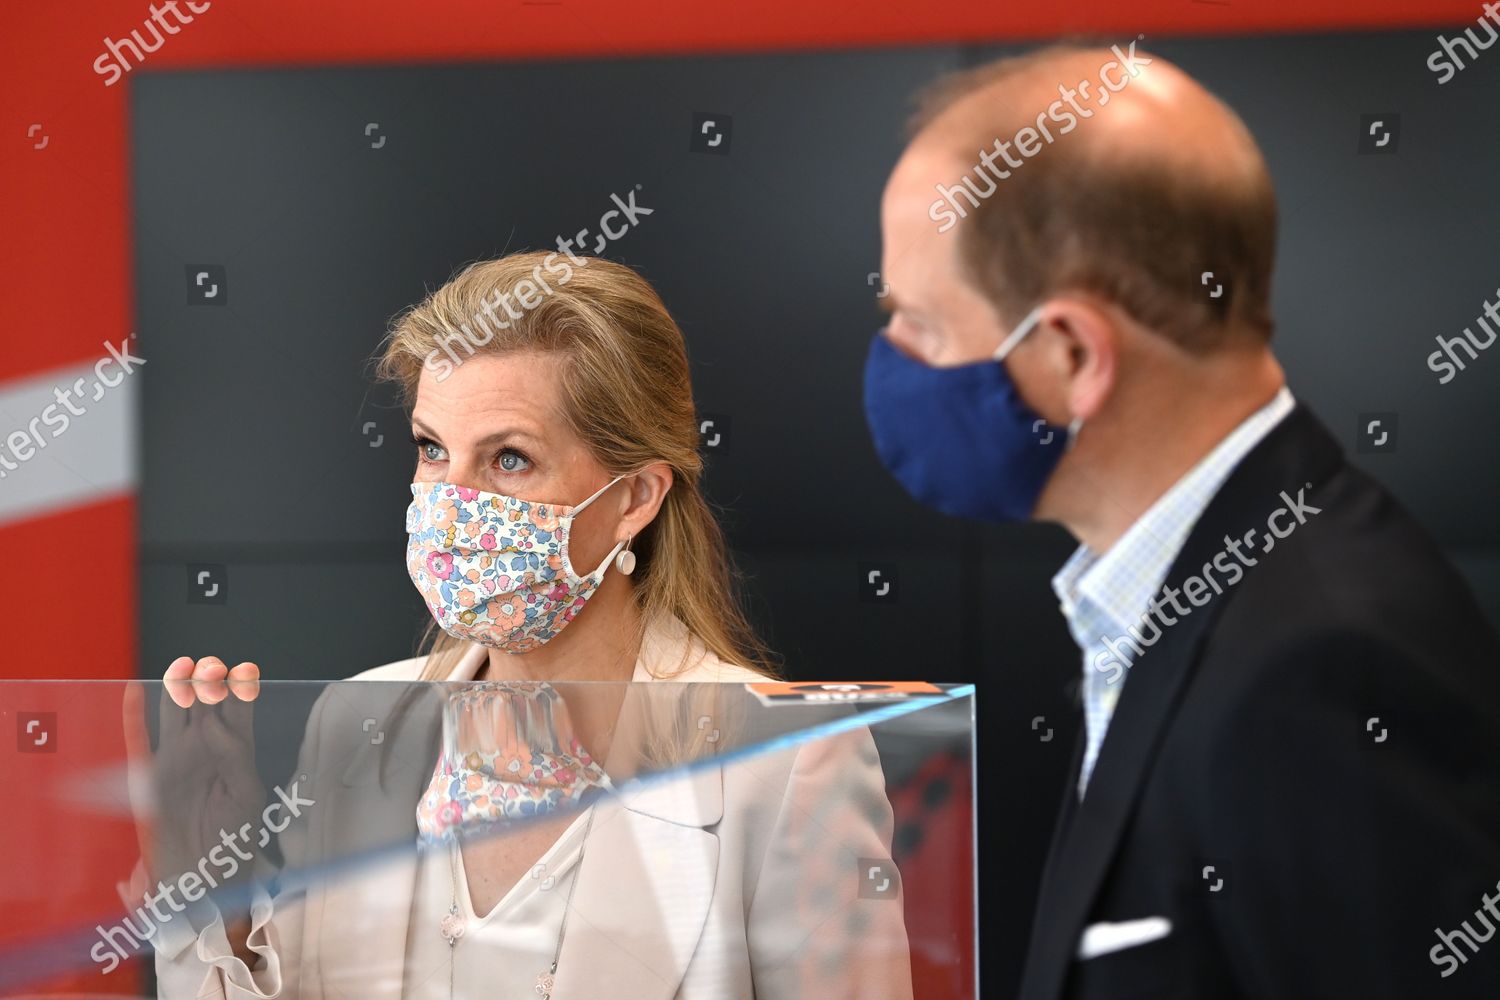 prince-edward-and-sophie-countess-of-wessex-visit-to-edinburgh-scotland-uk-shutterstock-editorial-12173651q.jpg